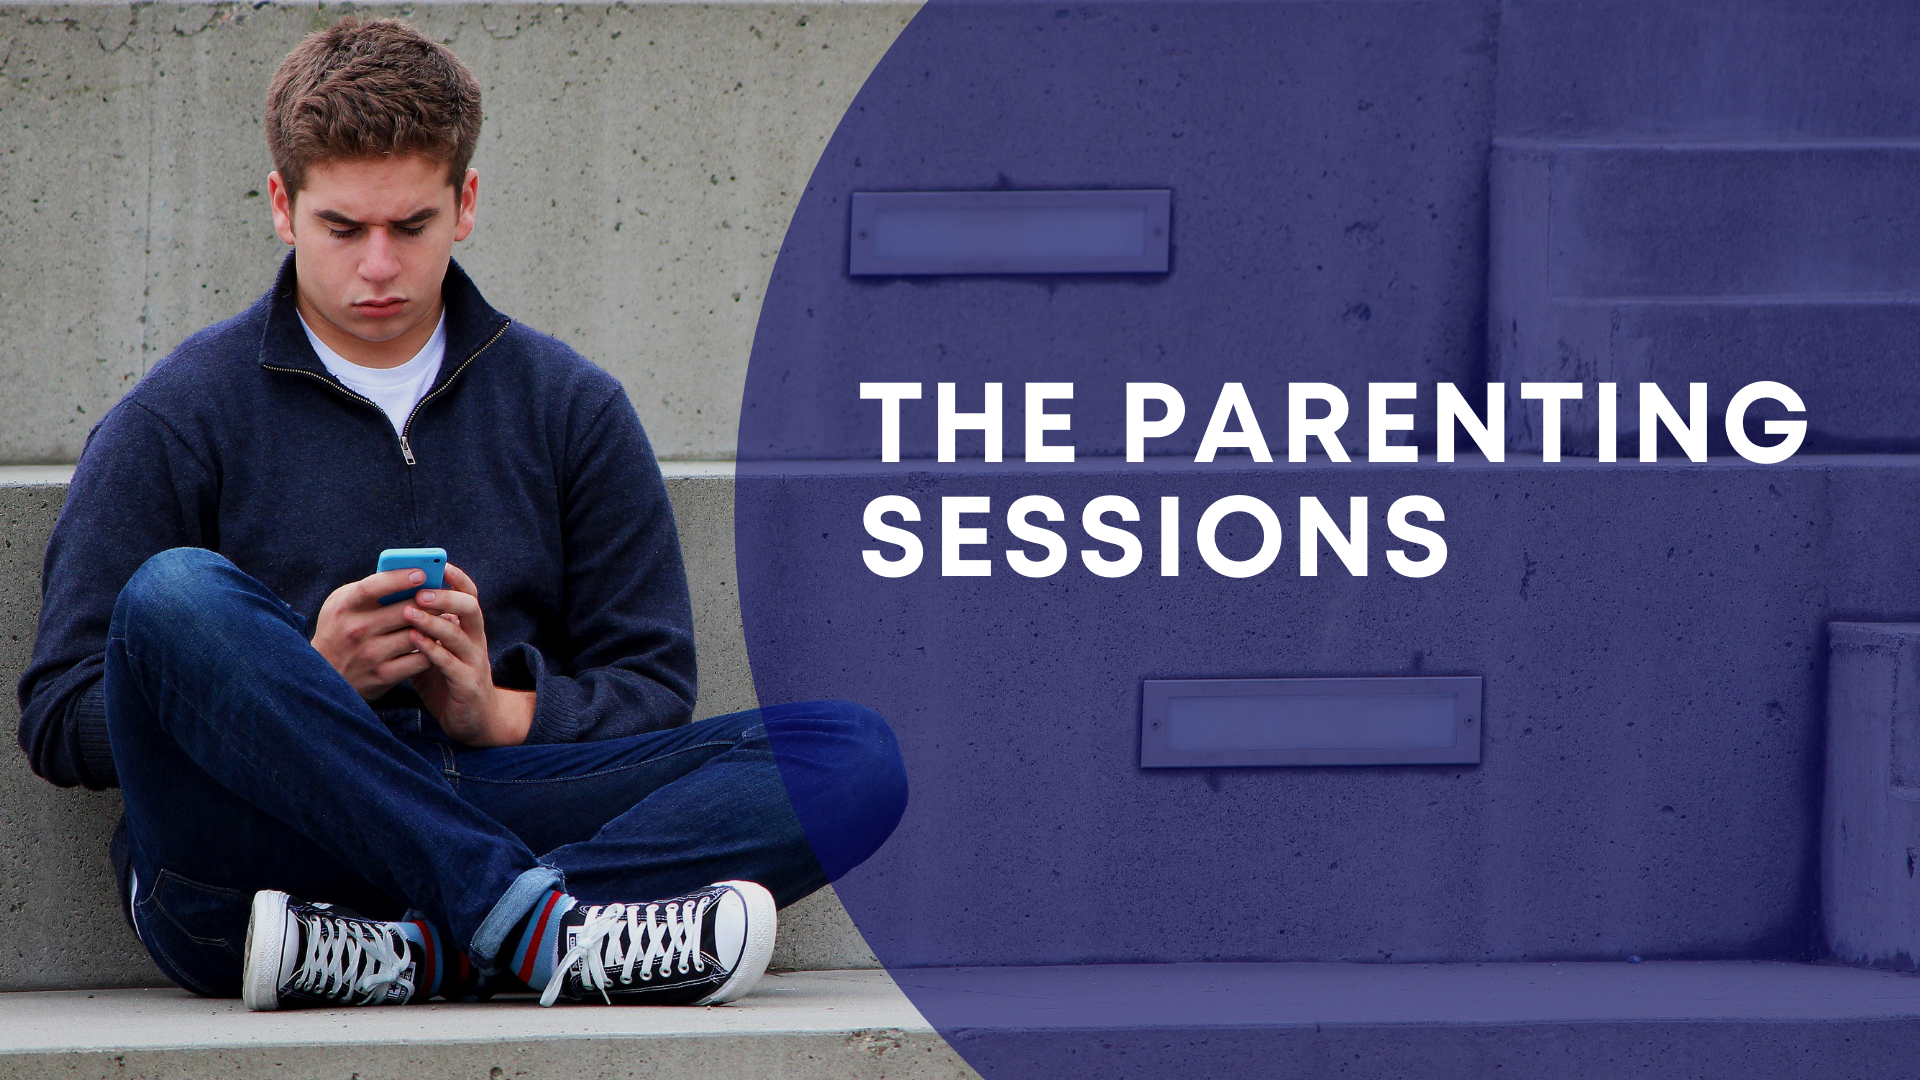 THE PARENTING SESSIONS (Social